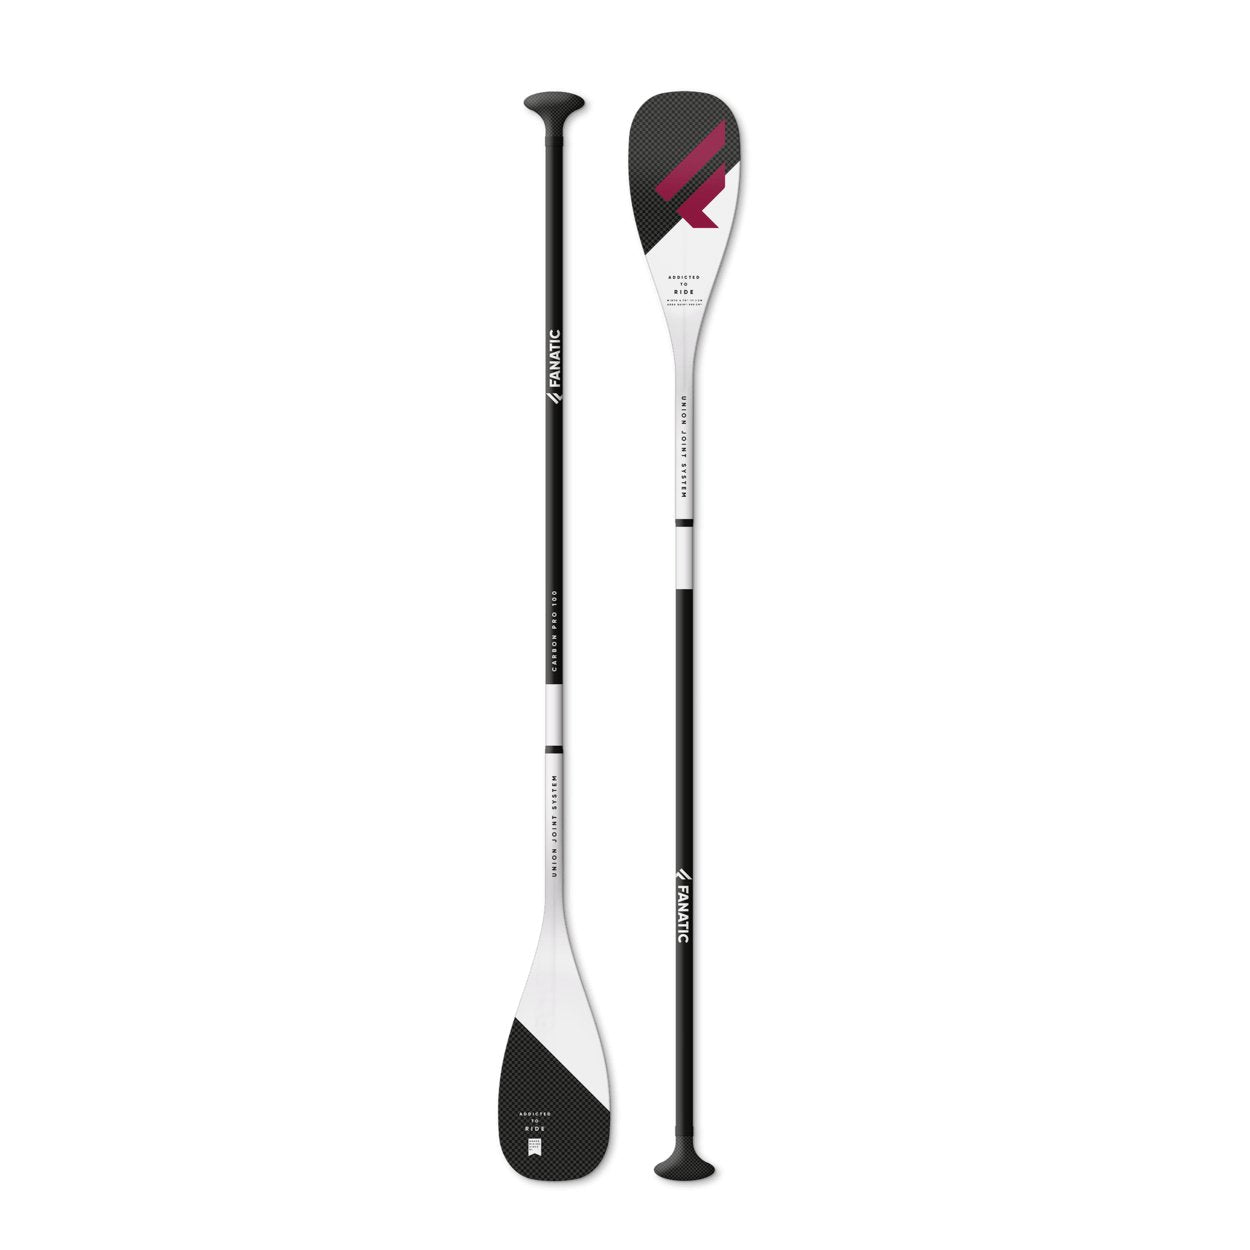 Fanatic Carbon Pro 100 2022 - Worthing Watersports - 9008415923137 - Paddles - Fanatic SUP